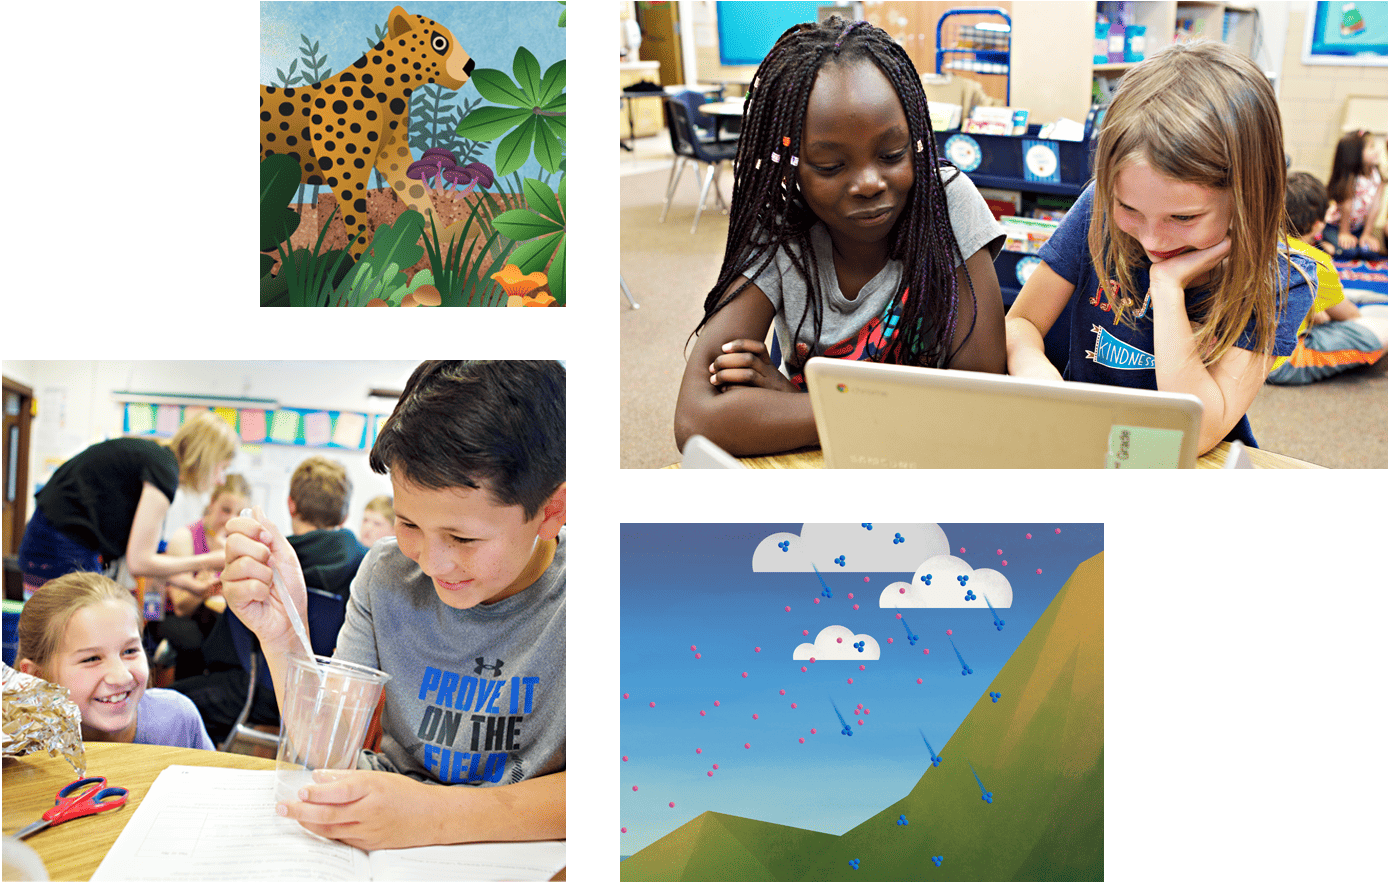 Collage of four images: a colorful illustration of a jungle with animals, two young girls using a computer in a classroom, a boy and girl studying together at a desk, and a digital artwork of a landscape with kites.